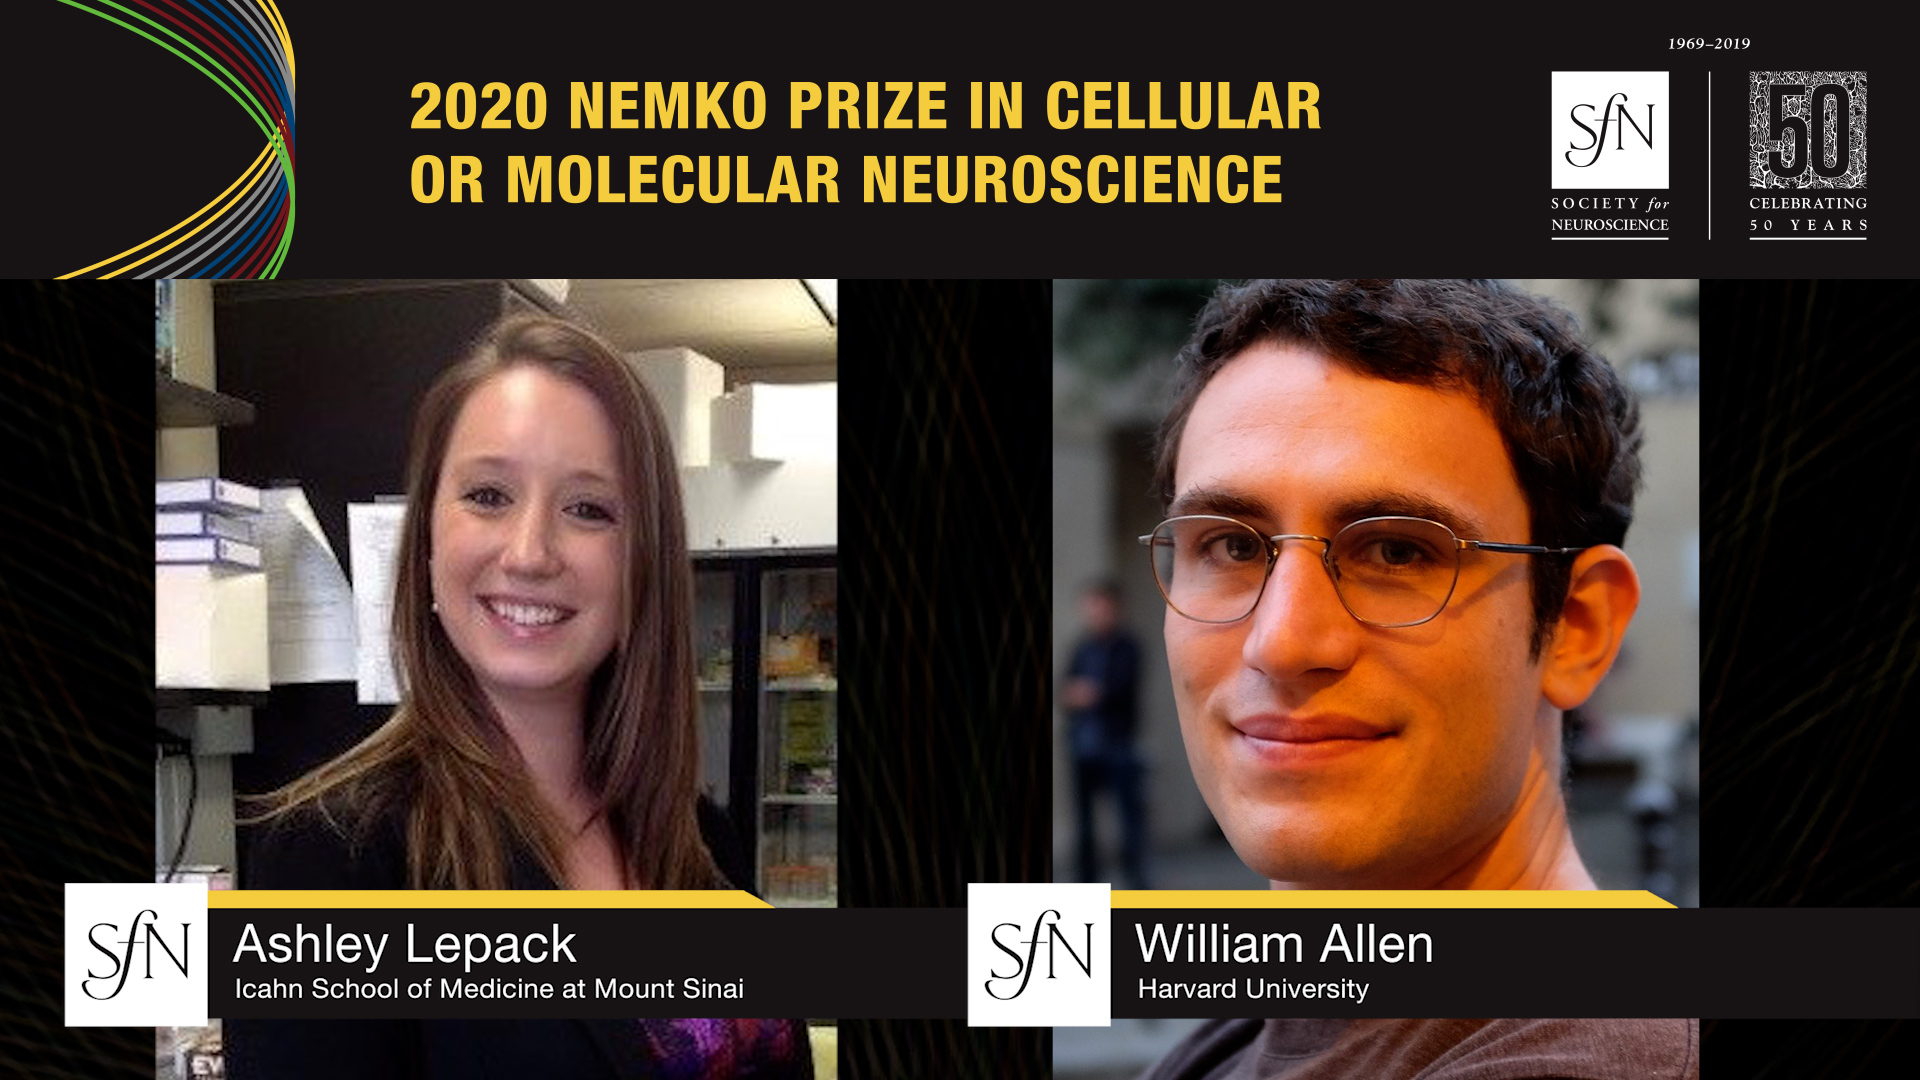 2020 Nemko Prize in Cellular or Molecular Neuroscience Award winners graphic, images of Ashley Lepack Icahn School of Medicine at Mount Sinai and William Allen Harvard University